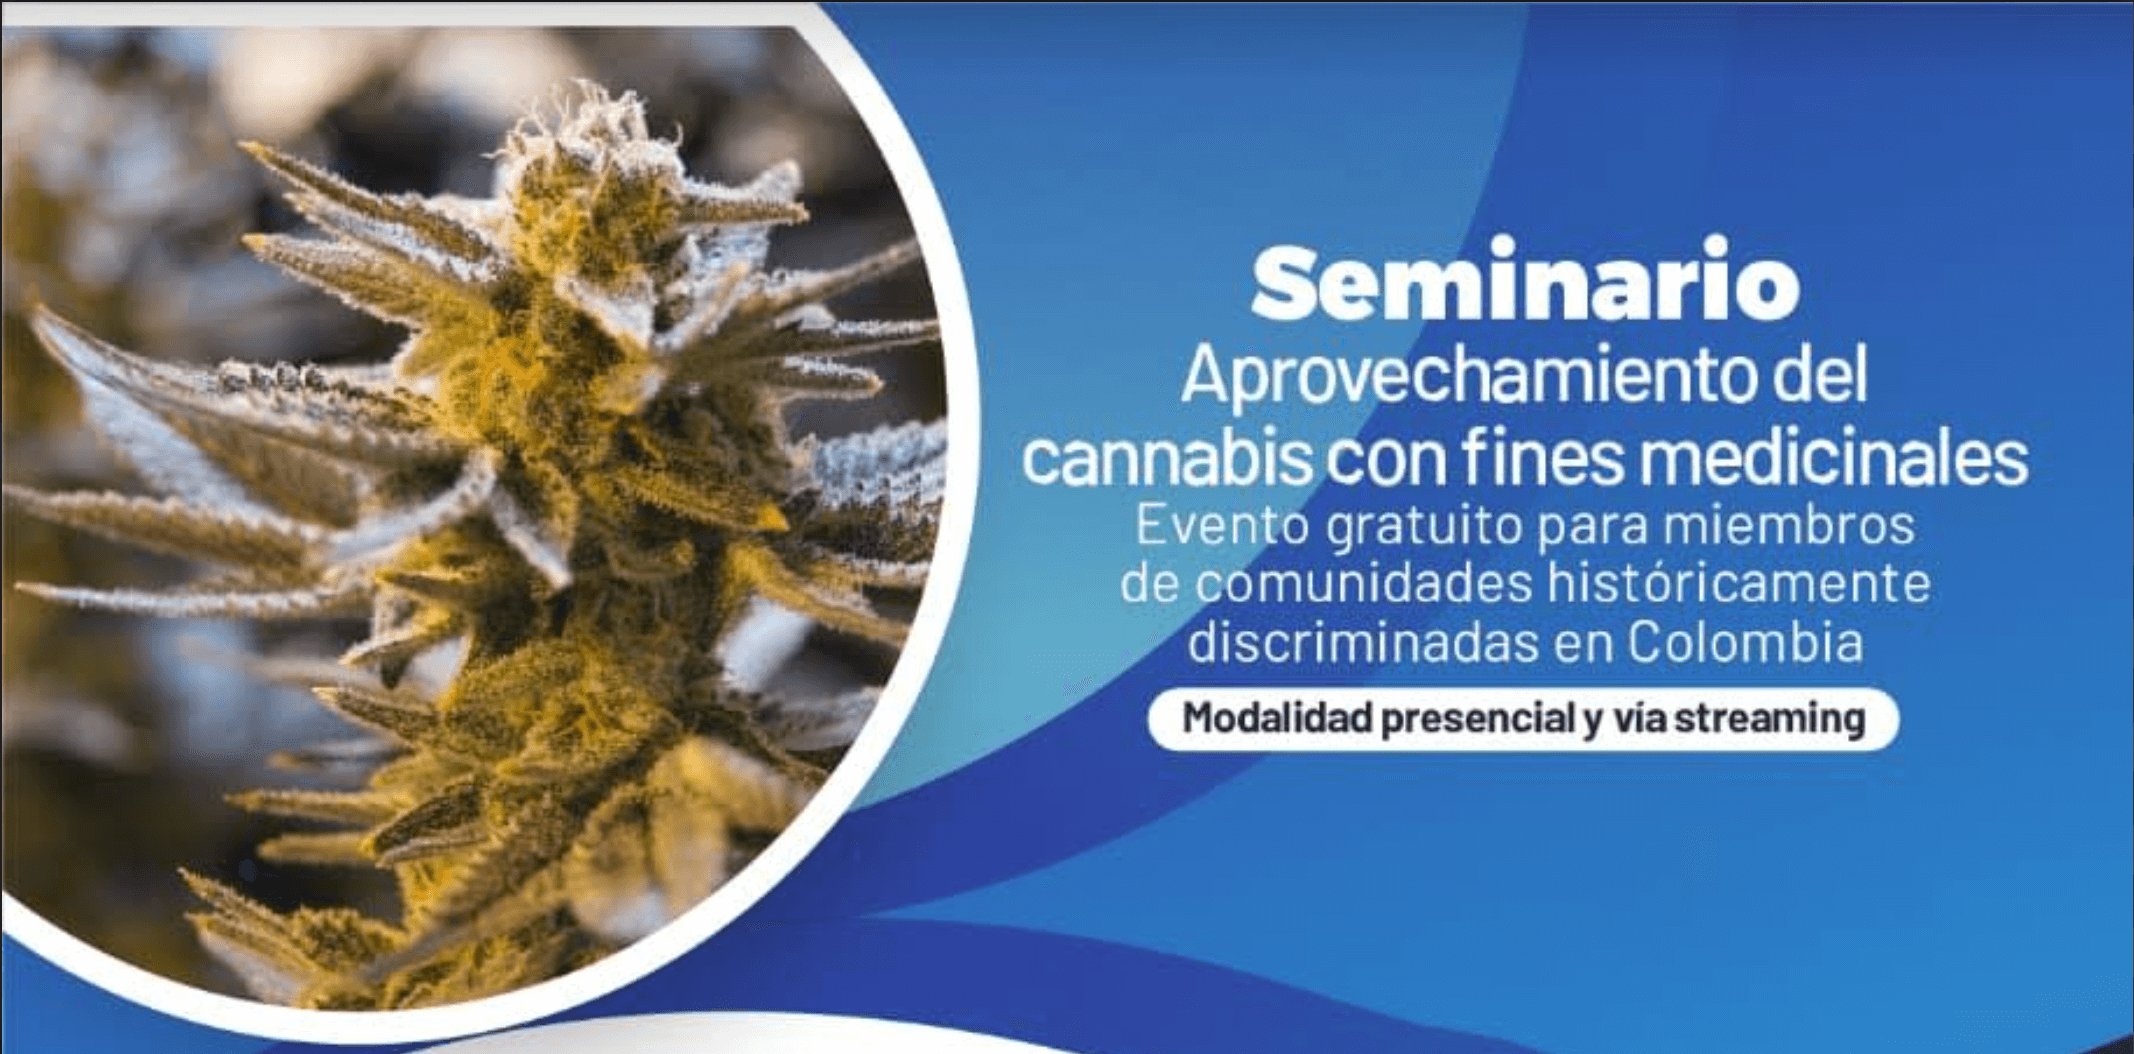 ICESI University Announces Free Cannabis Science Course for Members of Indigenous Communities In Colombia